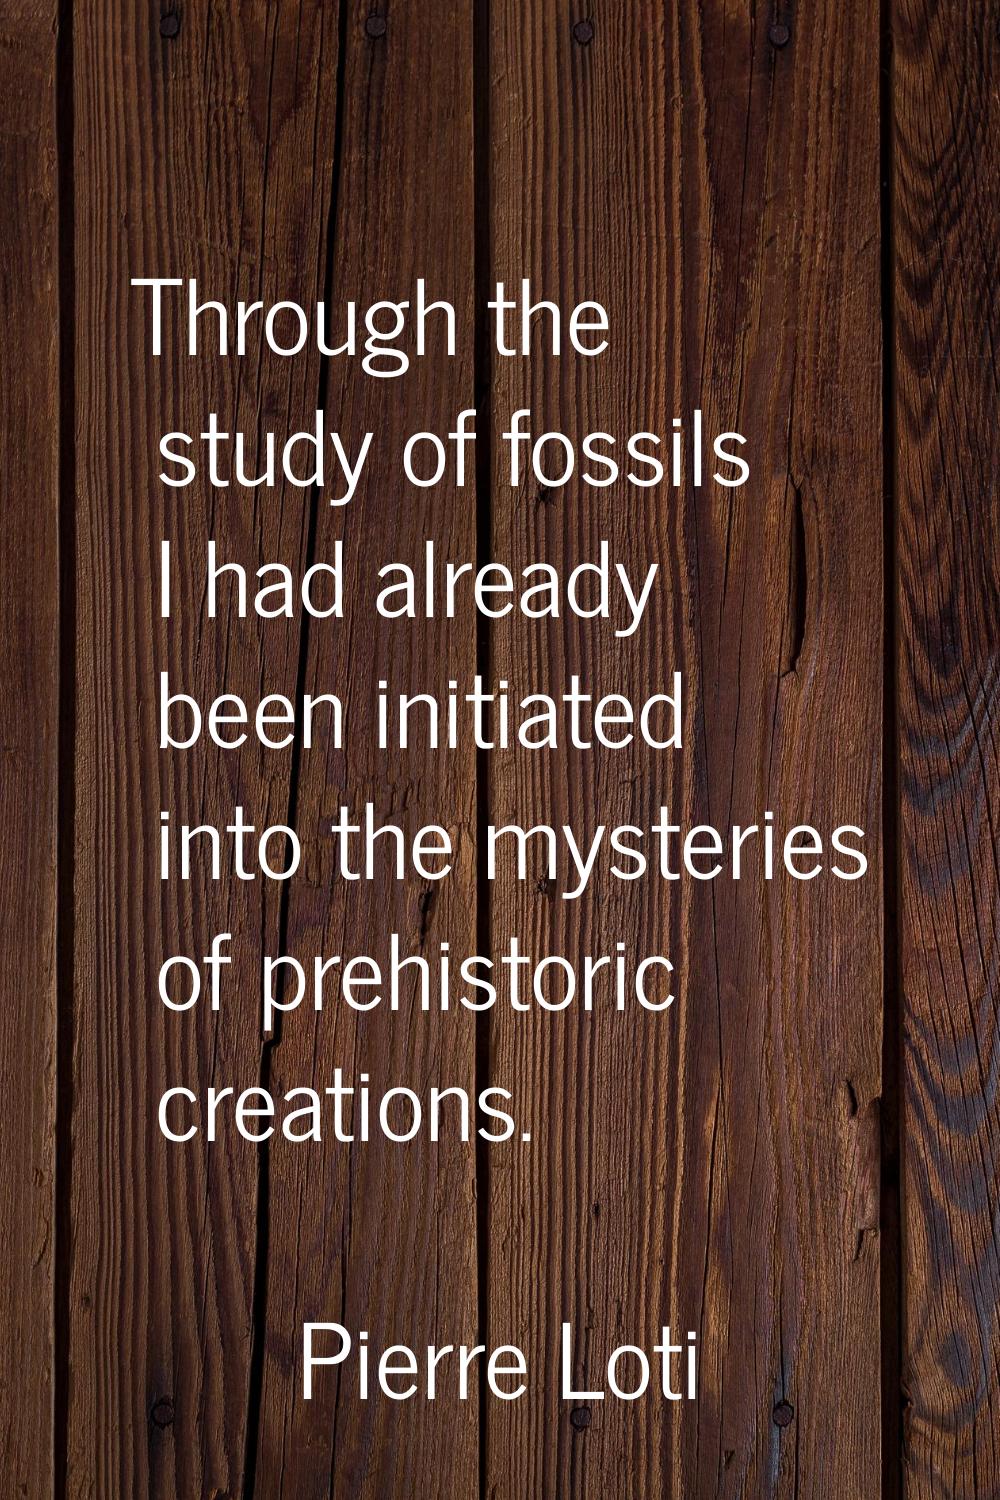 Through the study of fossils I had already been initiated into the mysteries of prehistoric creatio